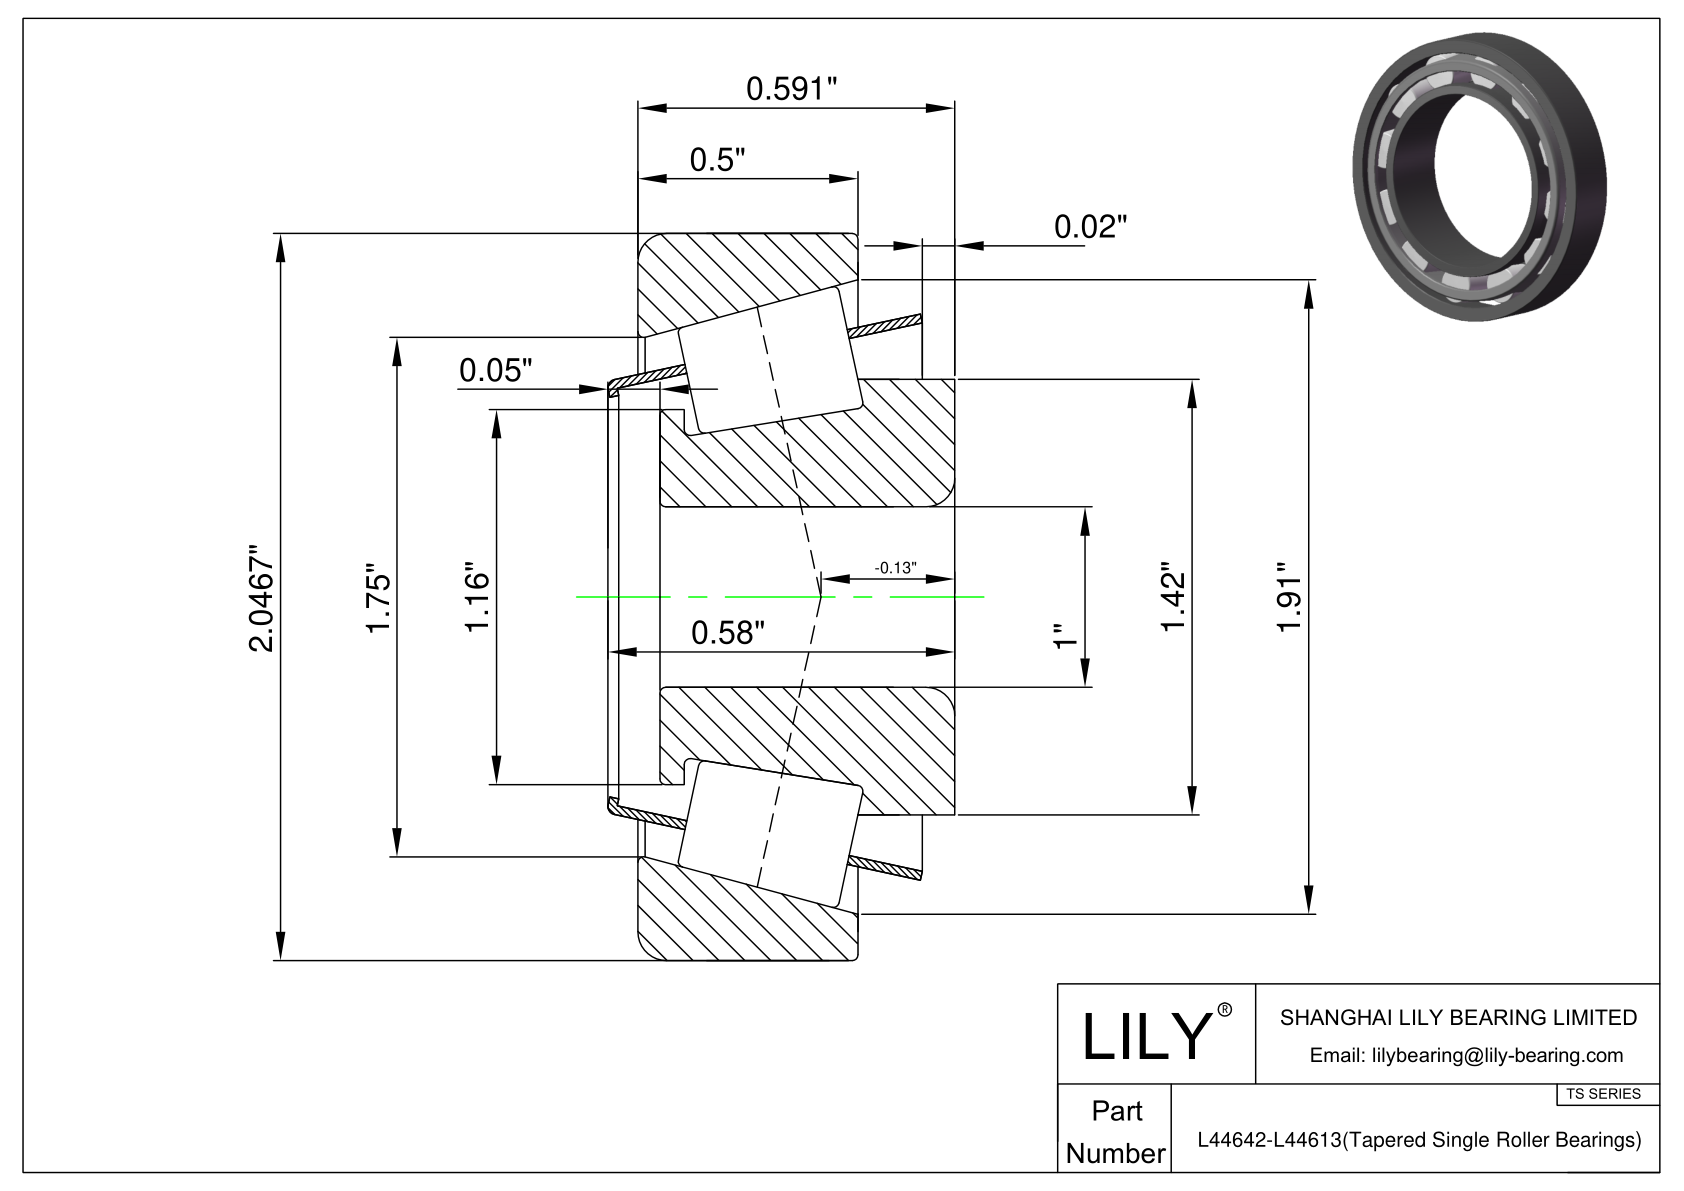 L44642-L44613 TS (Tapered Single Roller Bearings) (Imperial) cad drawing